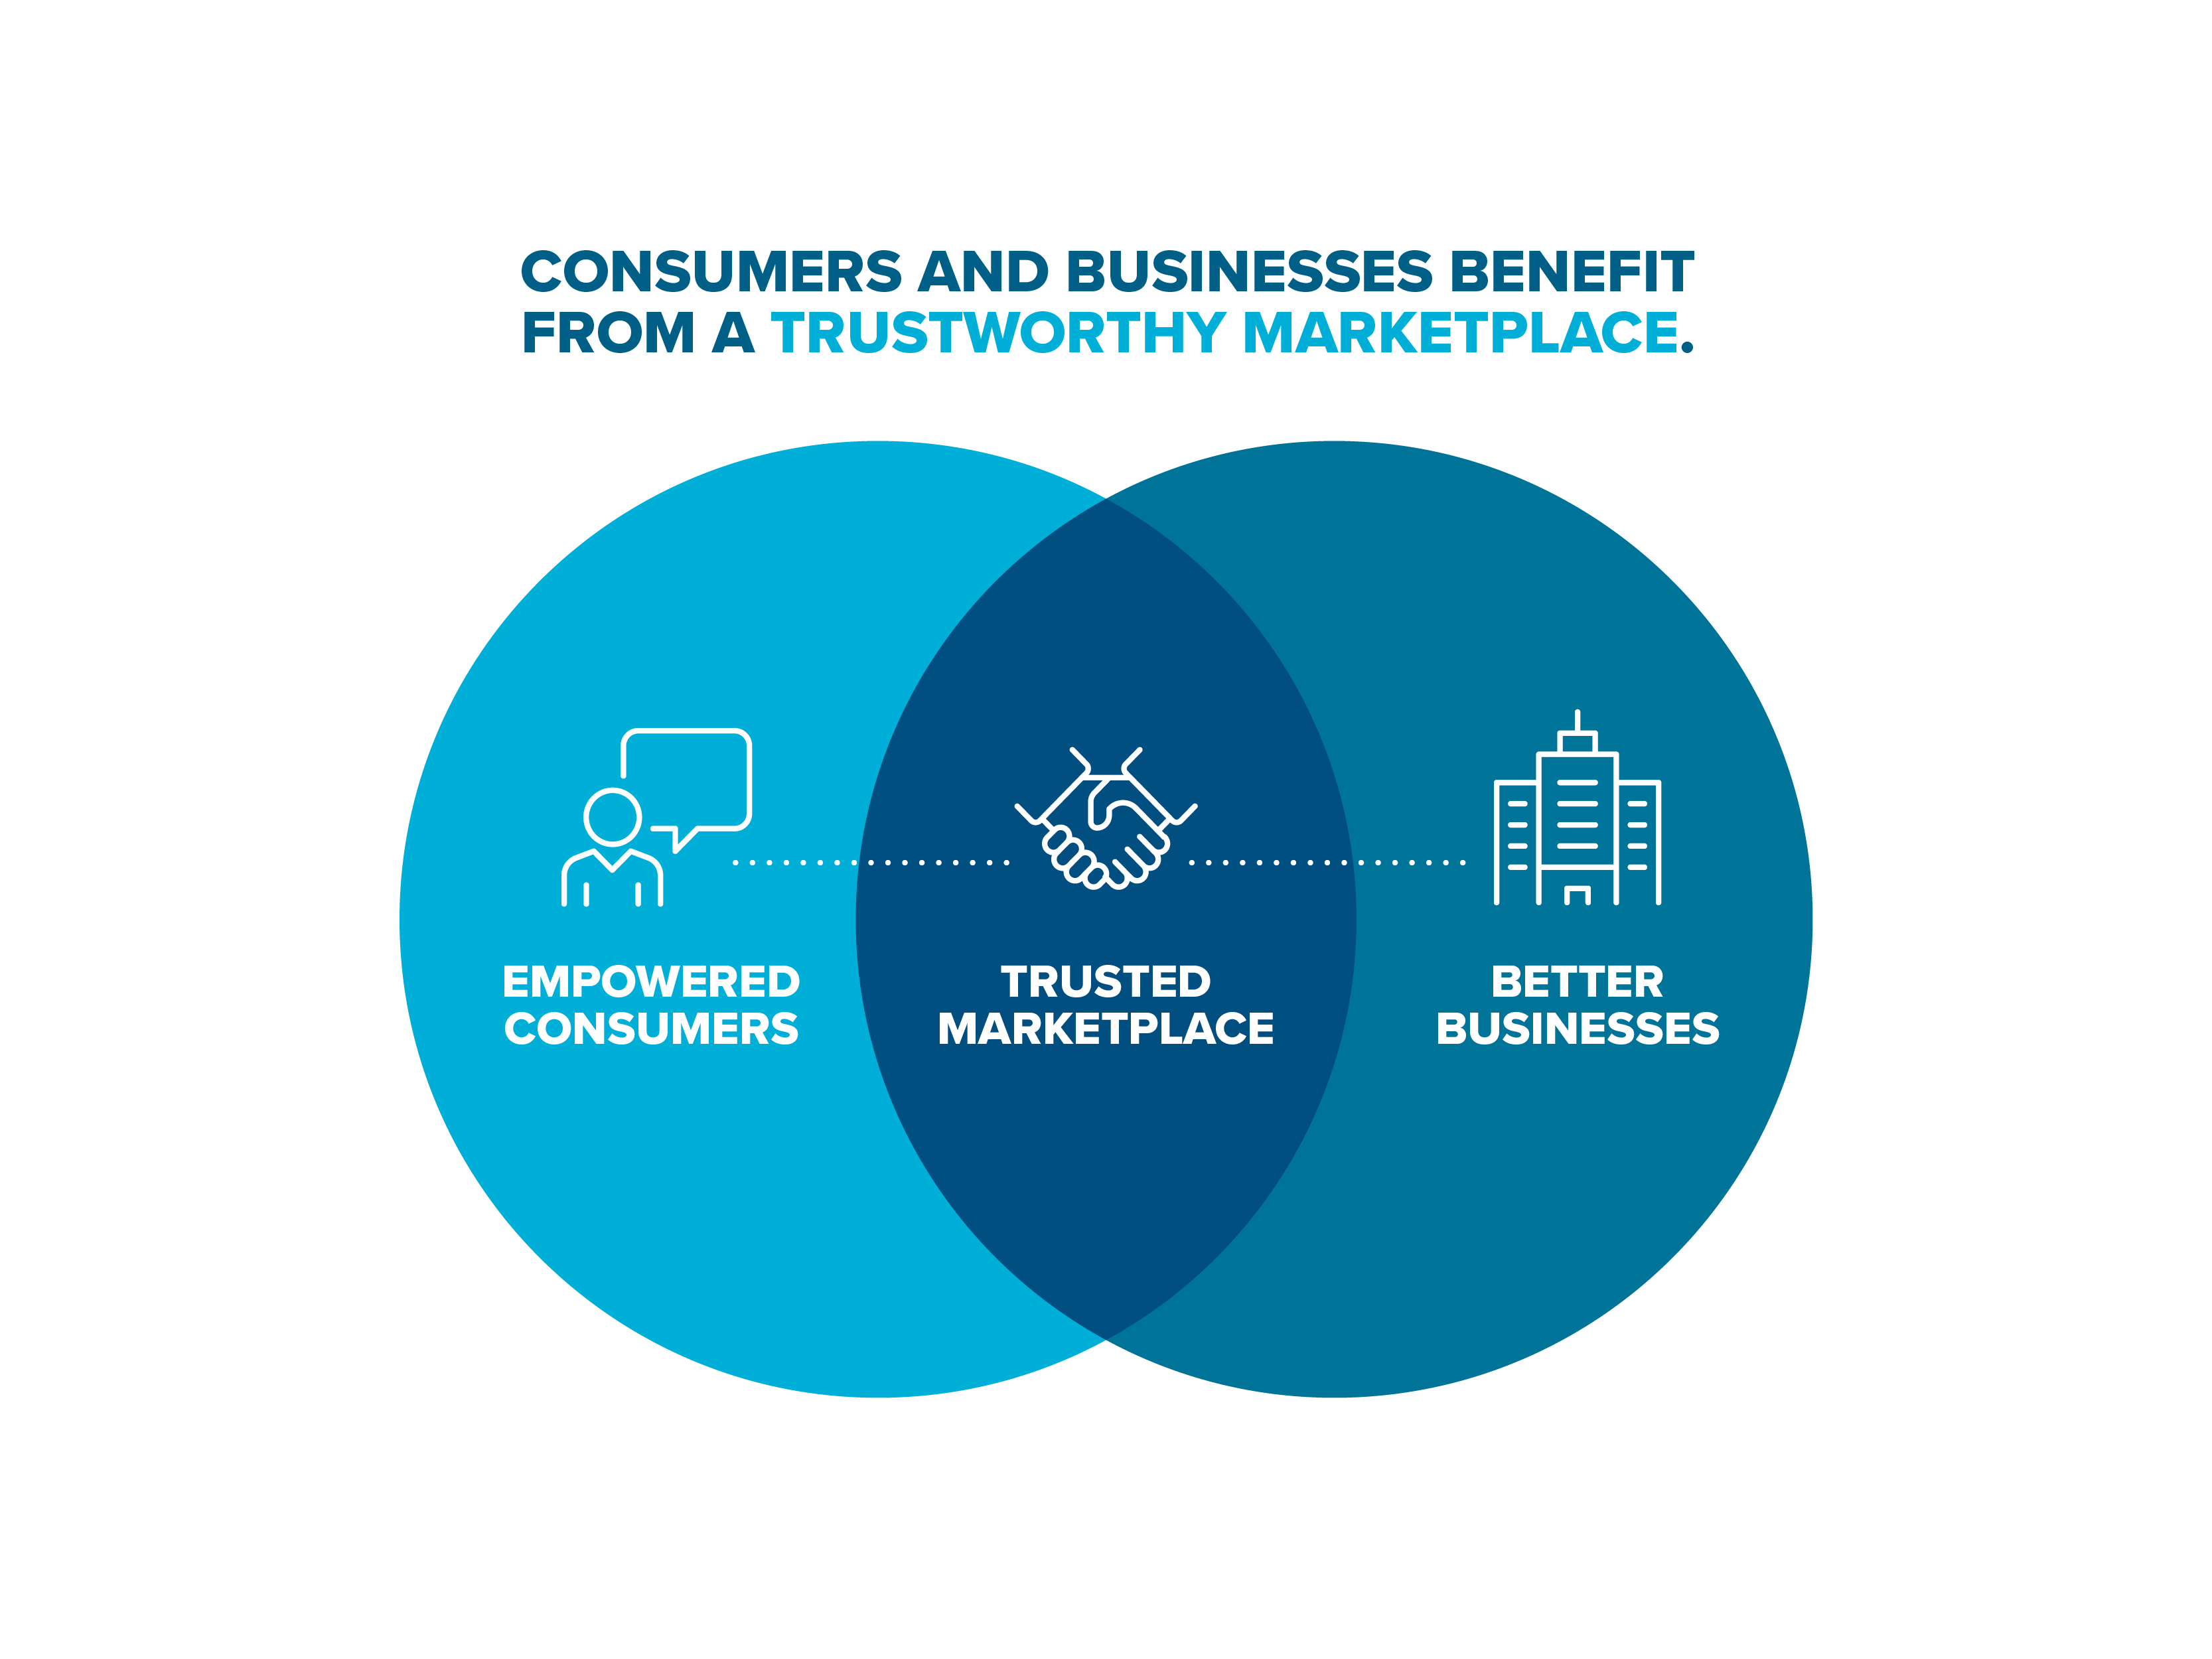 Picture of a venn diagram showing the overlap of empowered consumers, a trusted marketplace and better businesses